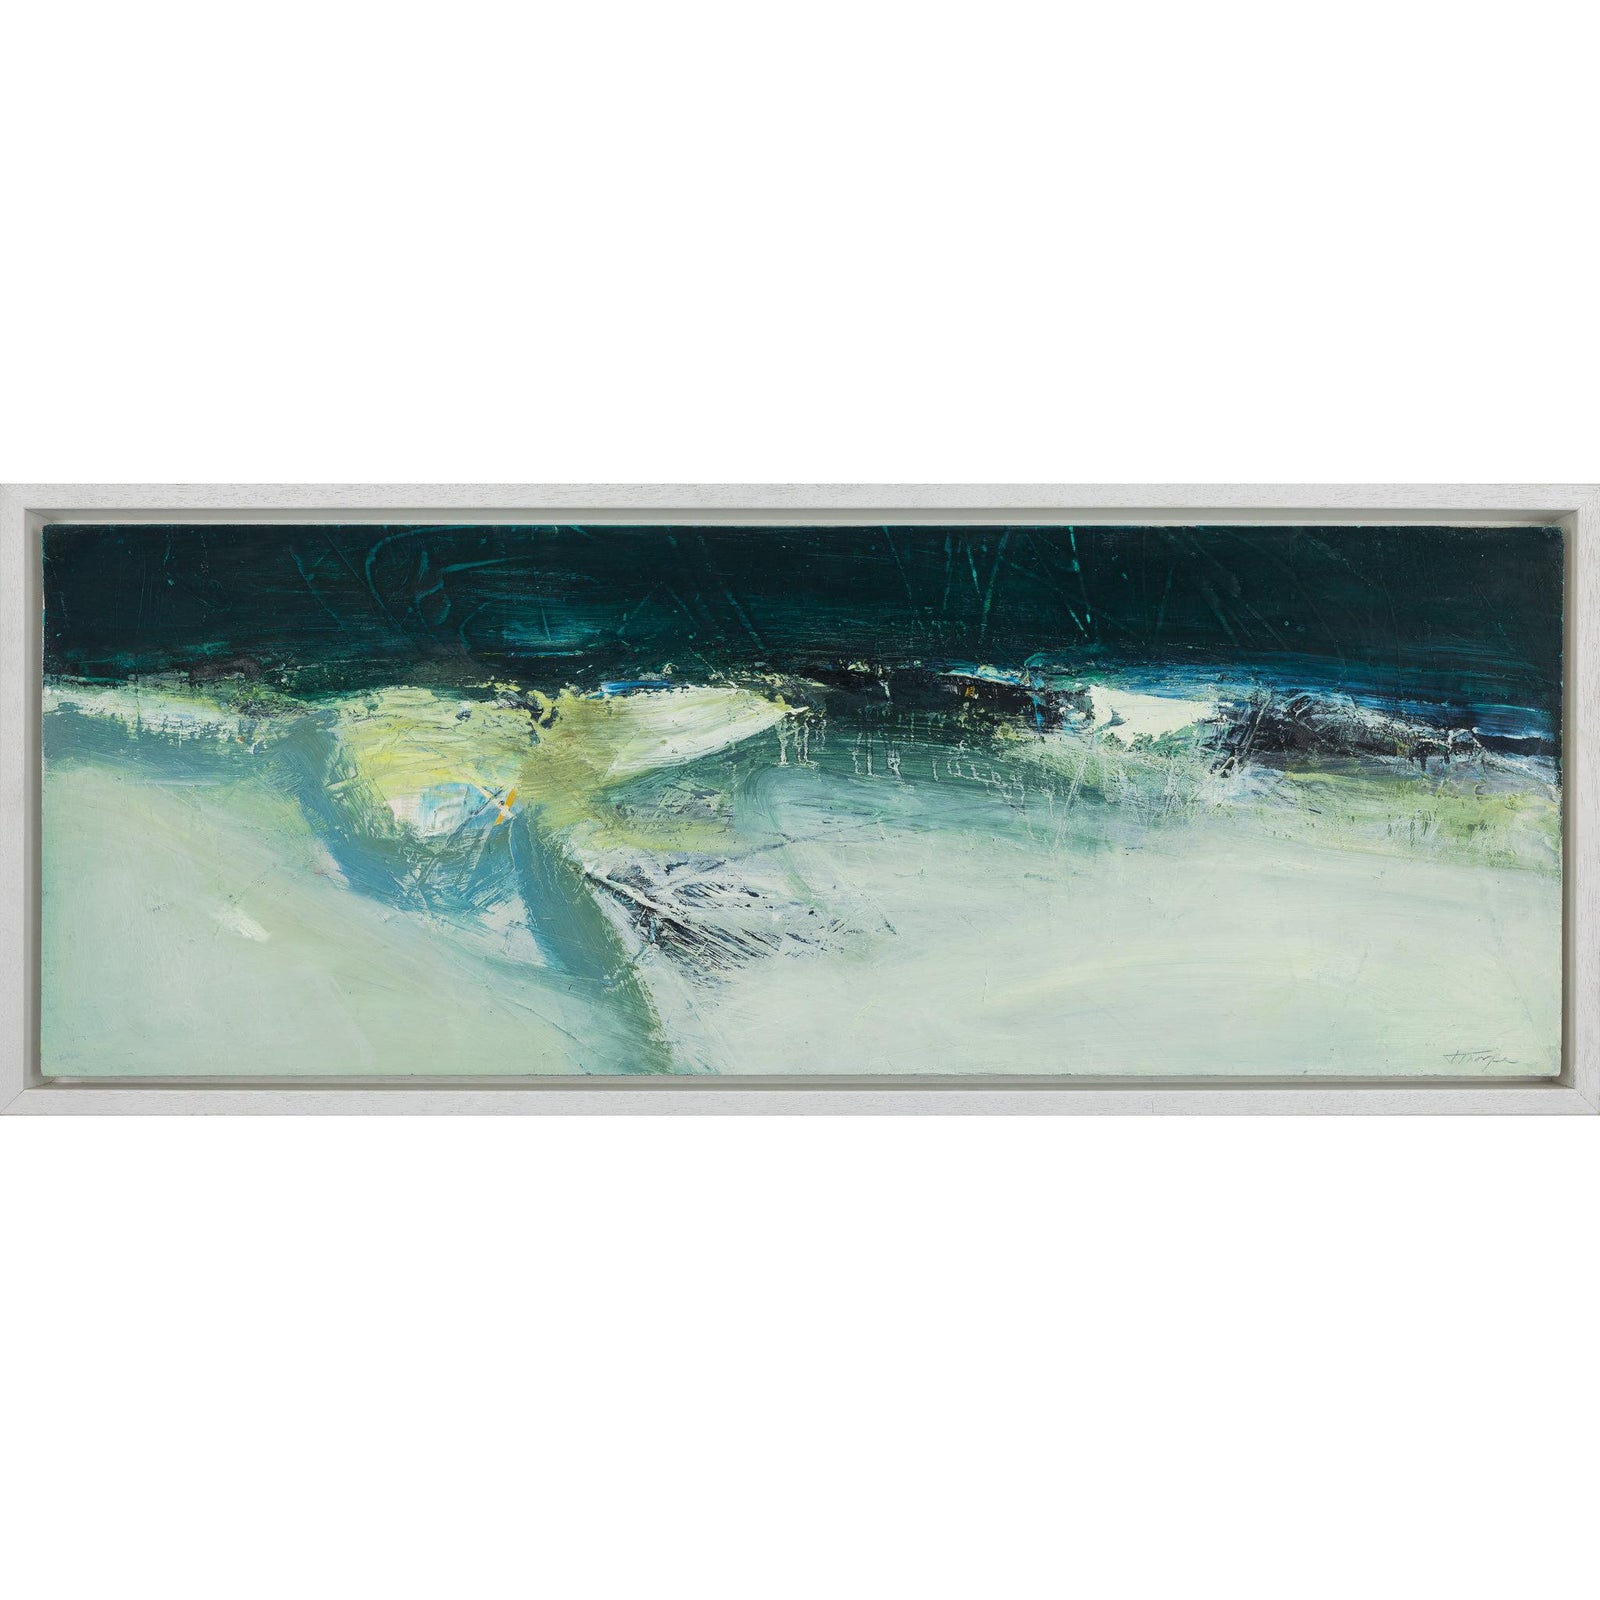 'Emerald Coastal' oil original by Justine Lois Thorpe, available at Padstow Gallery, Cornwall